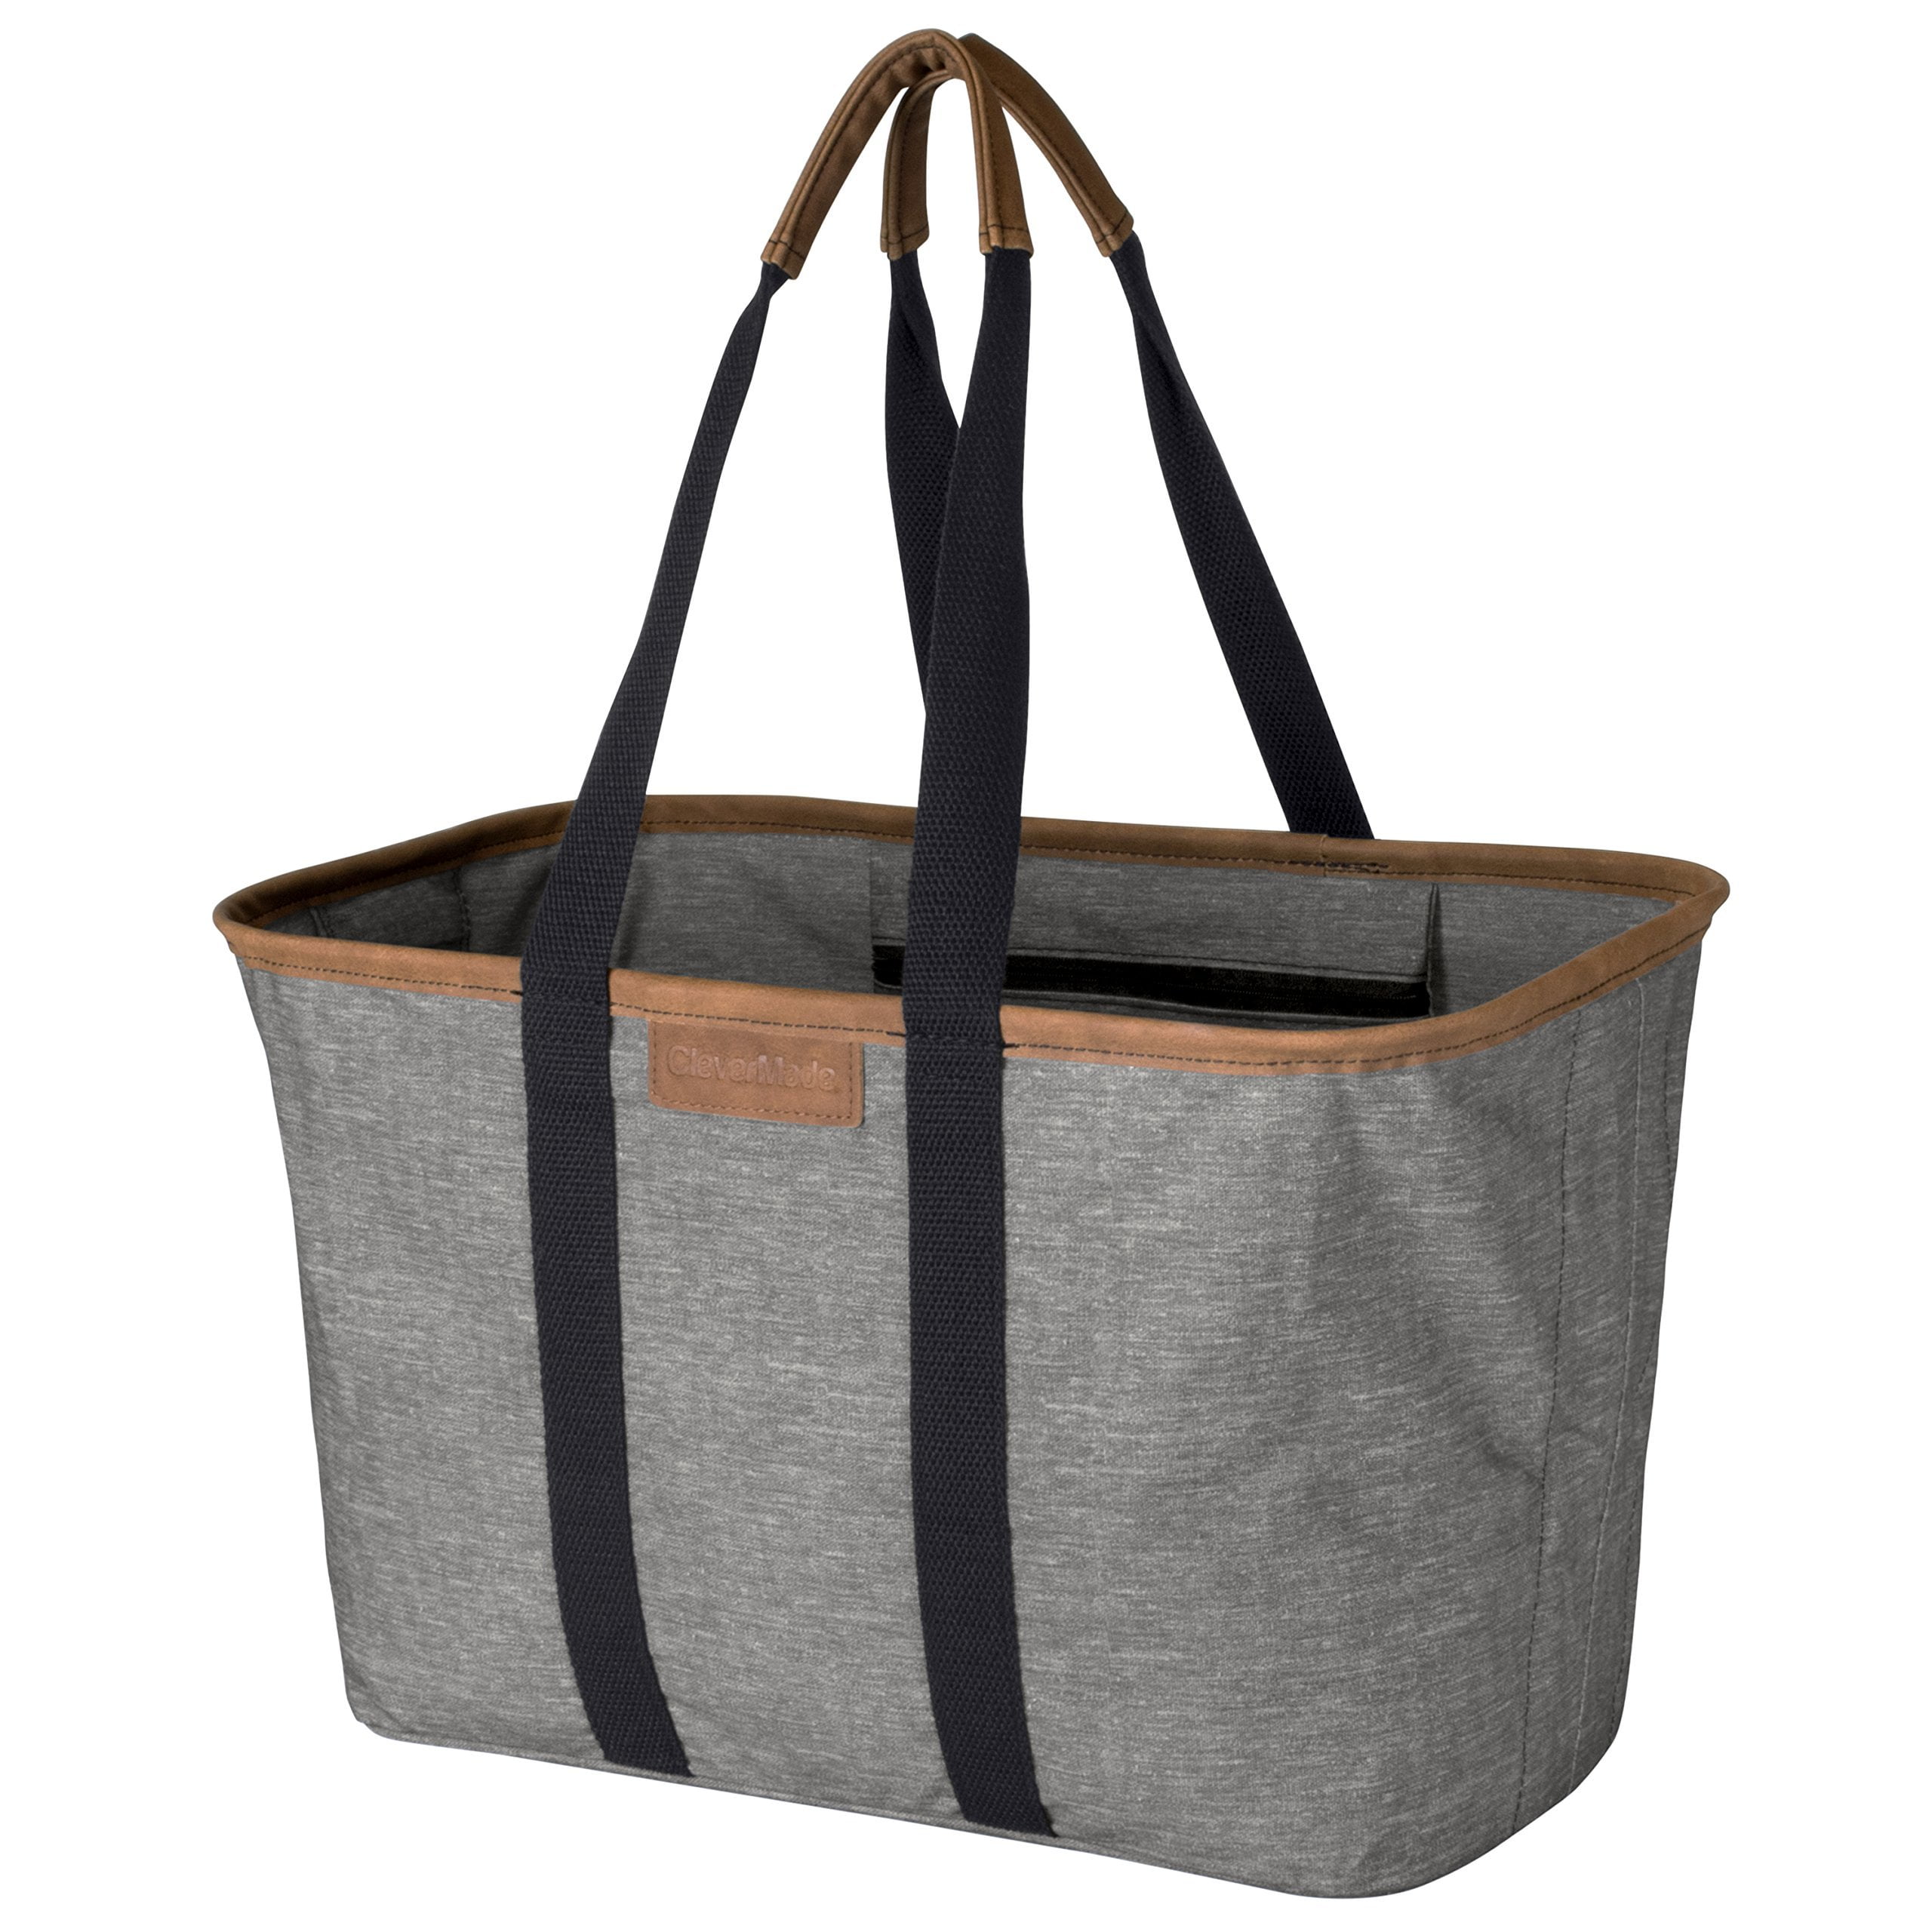 Men's Tote Bags in Luxe Leather, Canvas